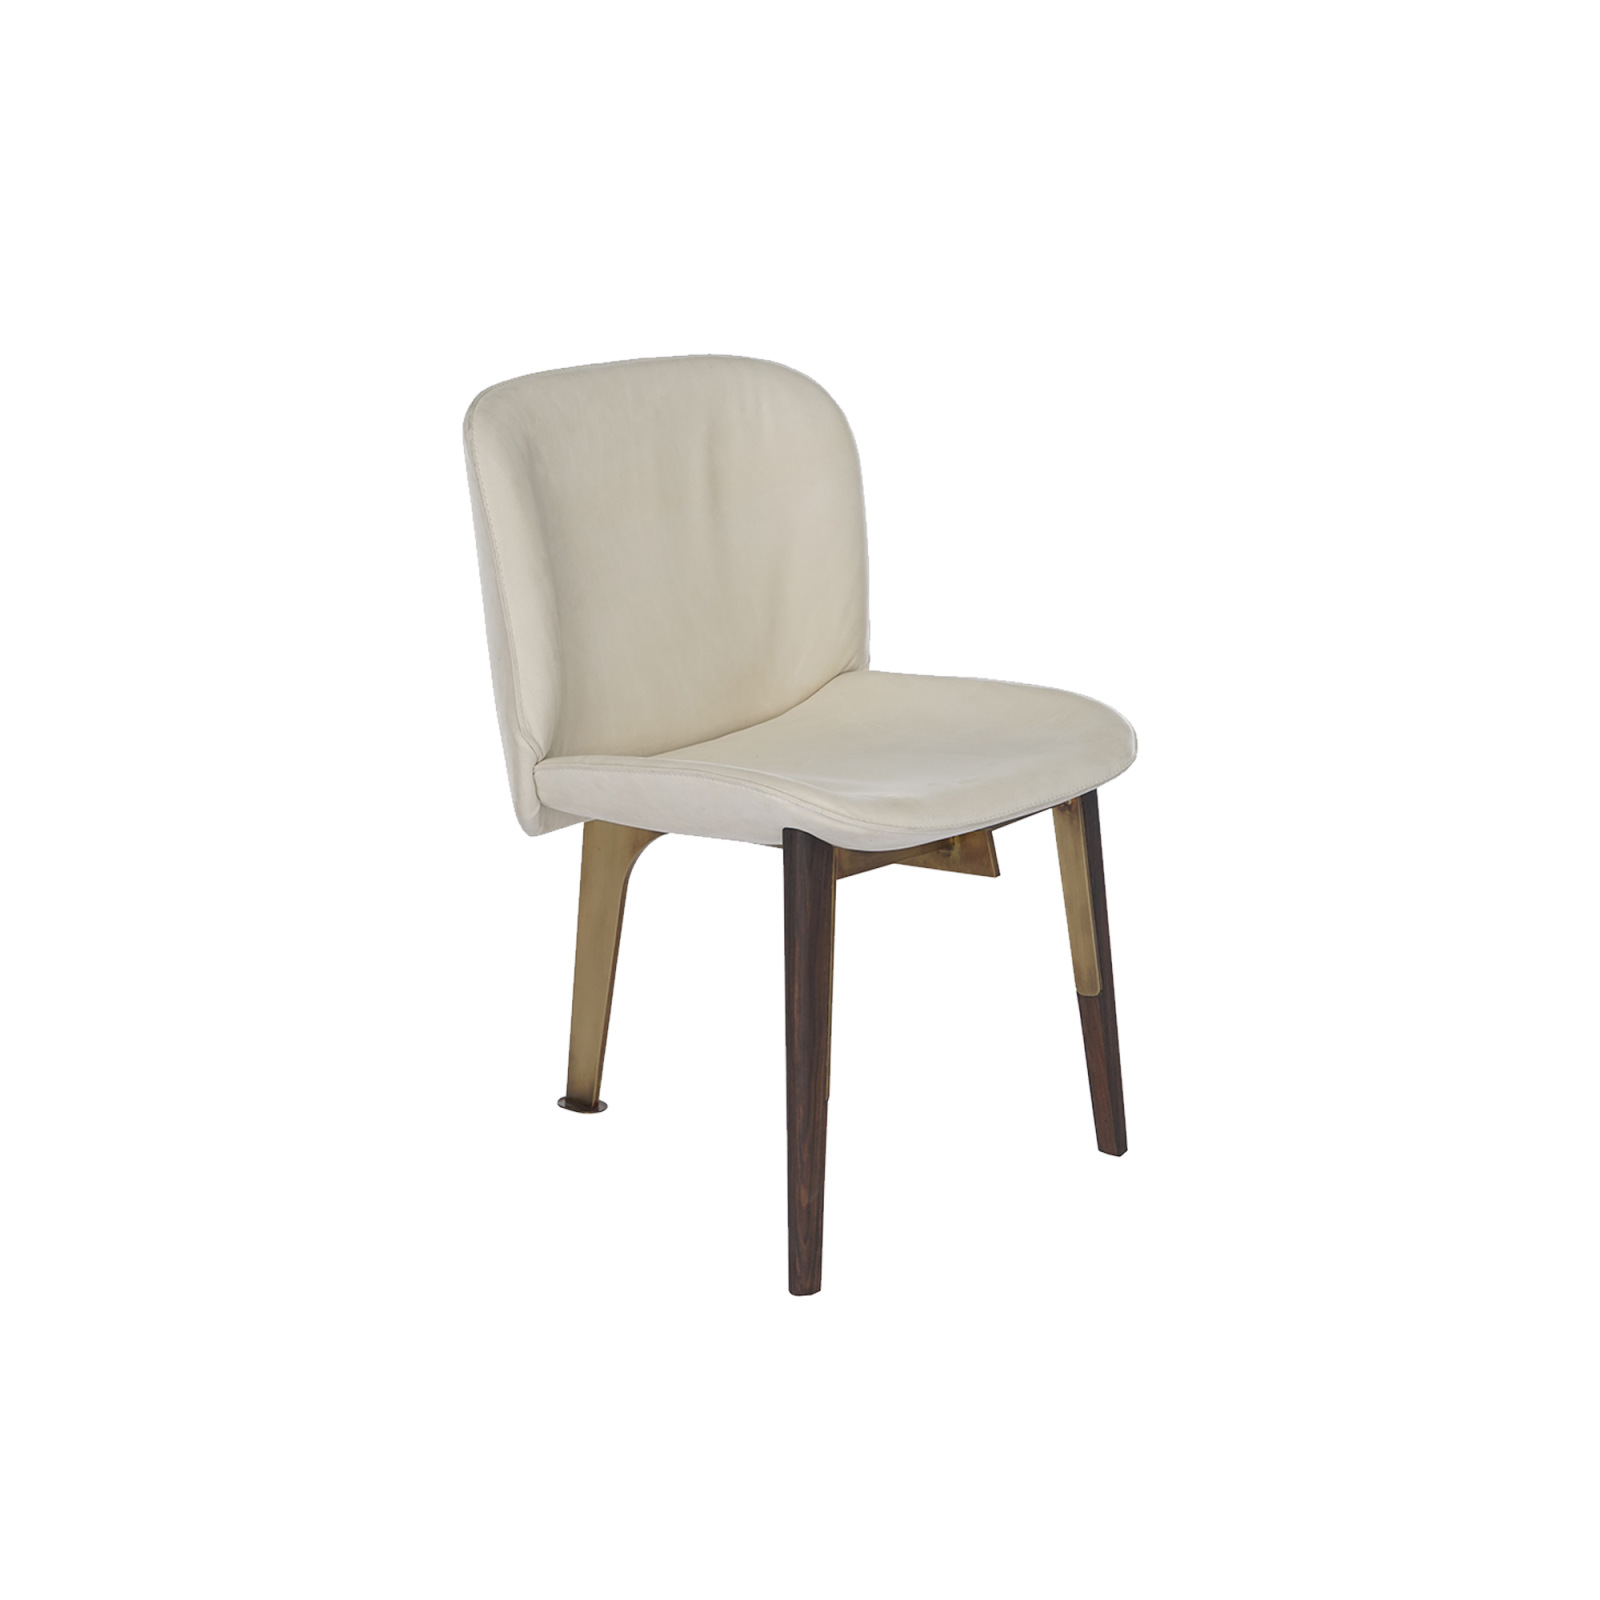 oyster chair with tumbled brass and wooden legs